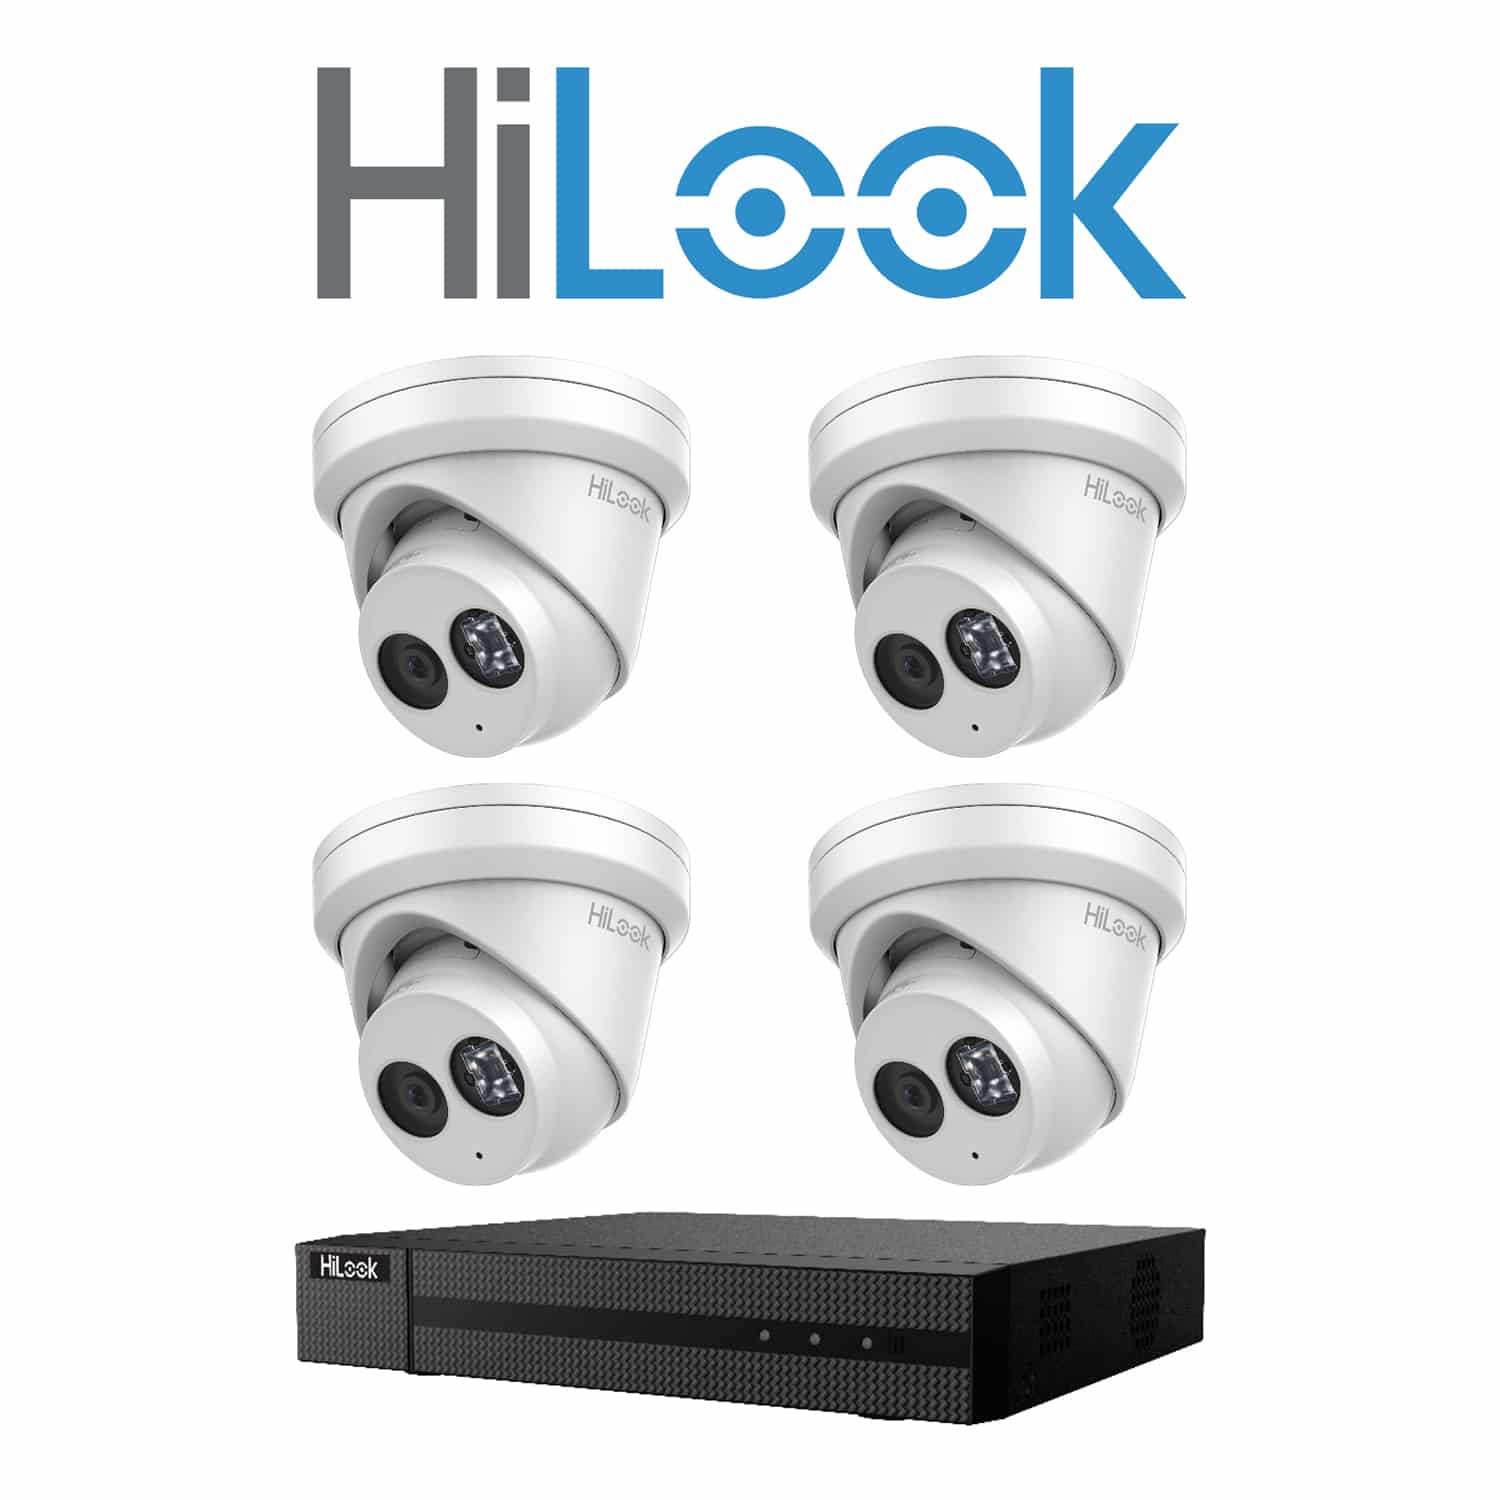 Hilook 8MP 4 camera package